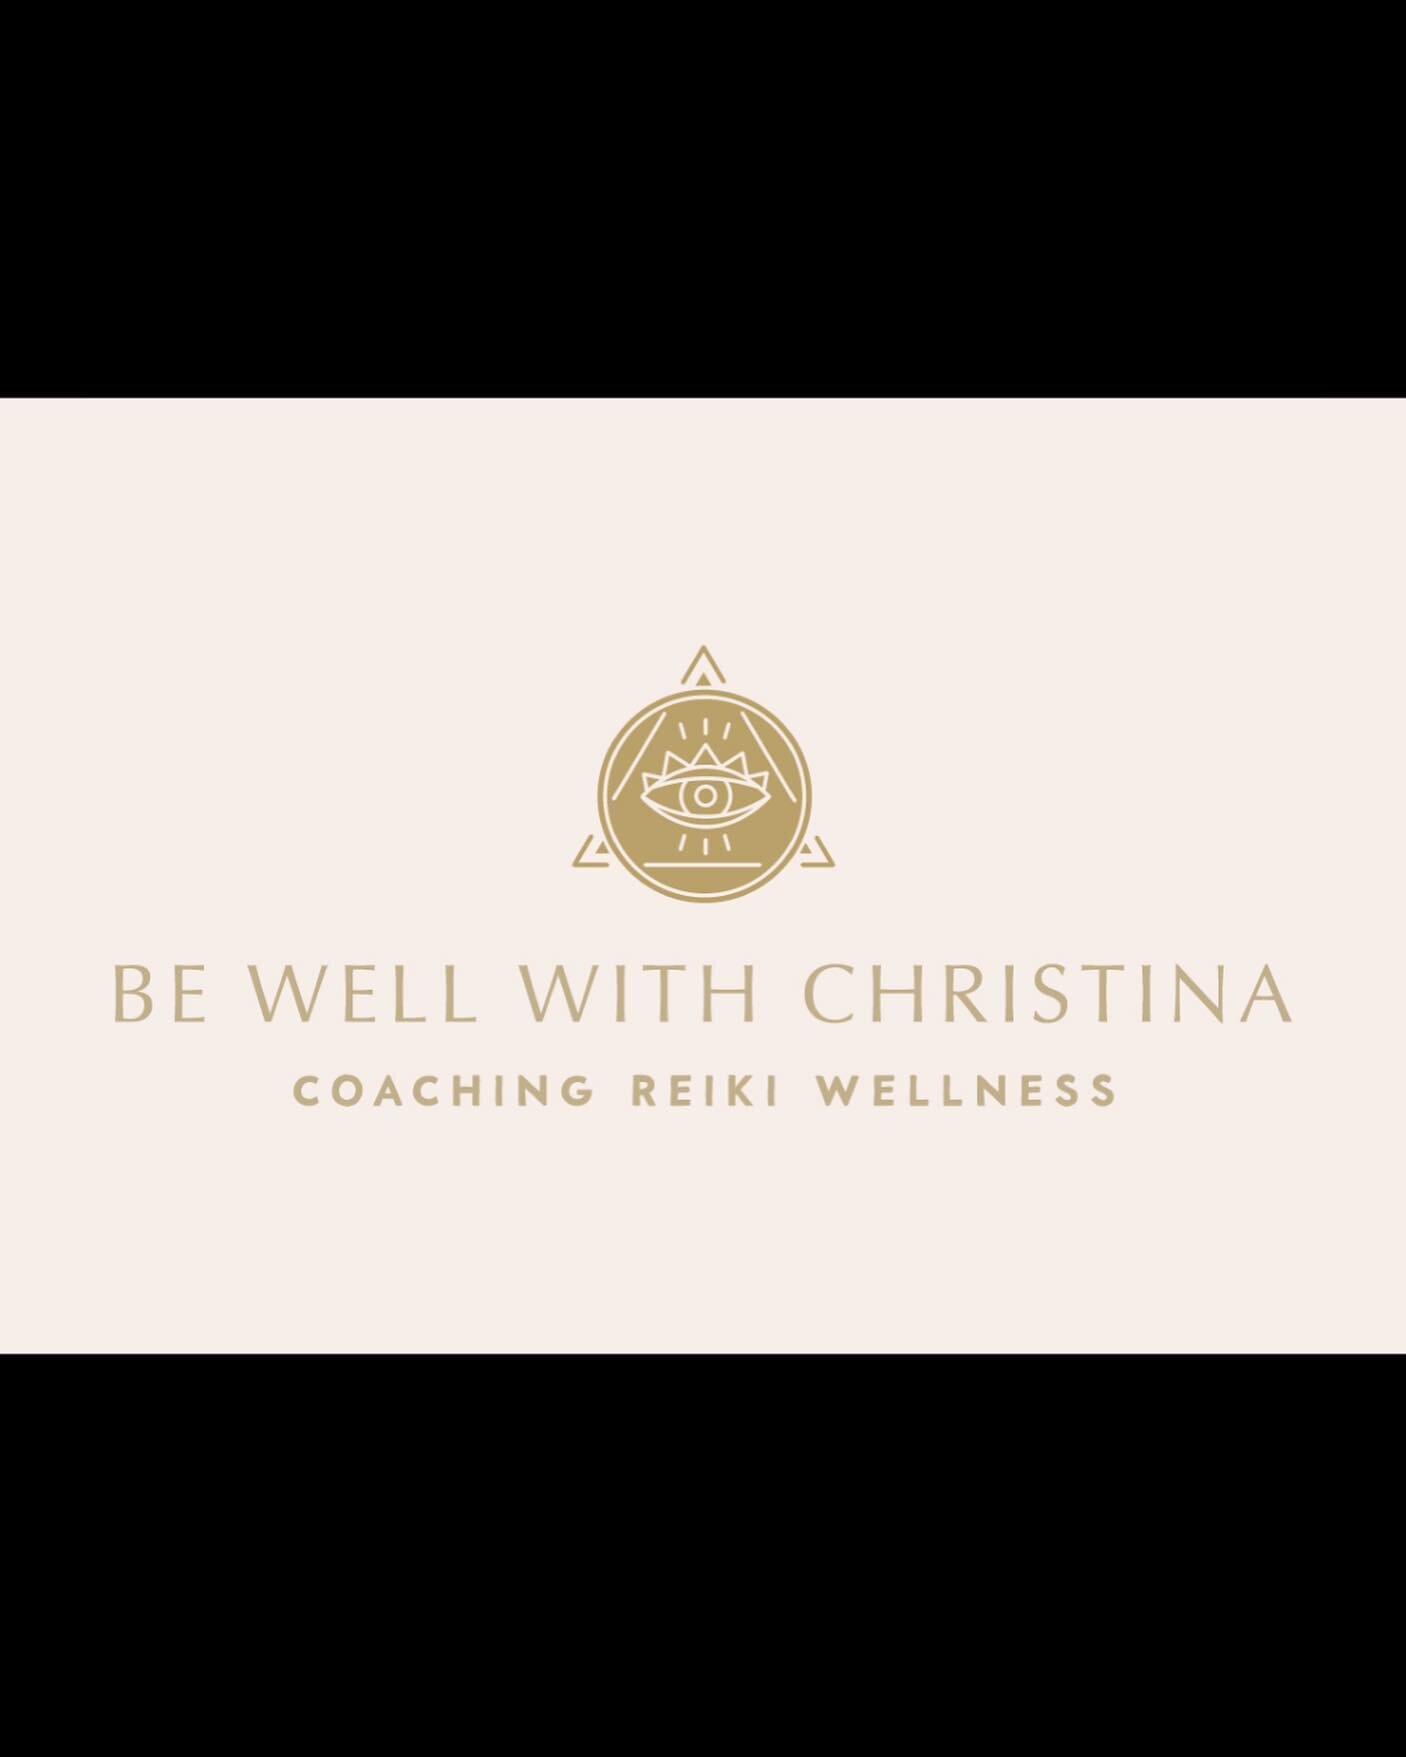 Coming in 2022! So EXCITED!!!! #wellness #coaching #lifecoaching #reikihealing #lightworker #manifesting